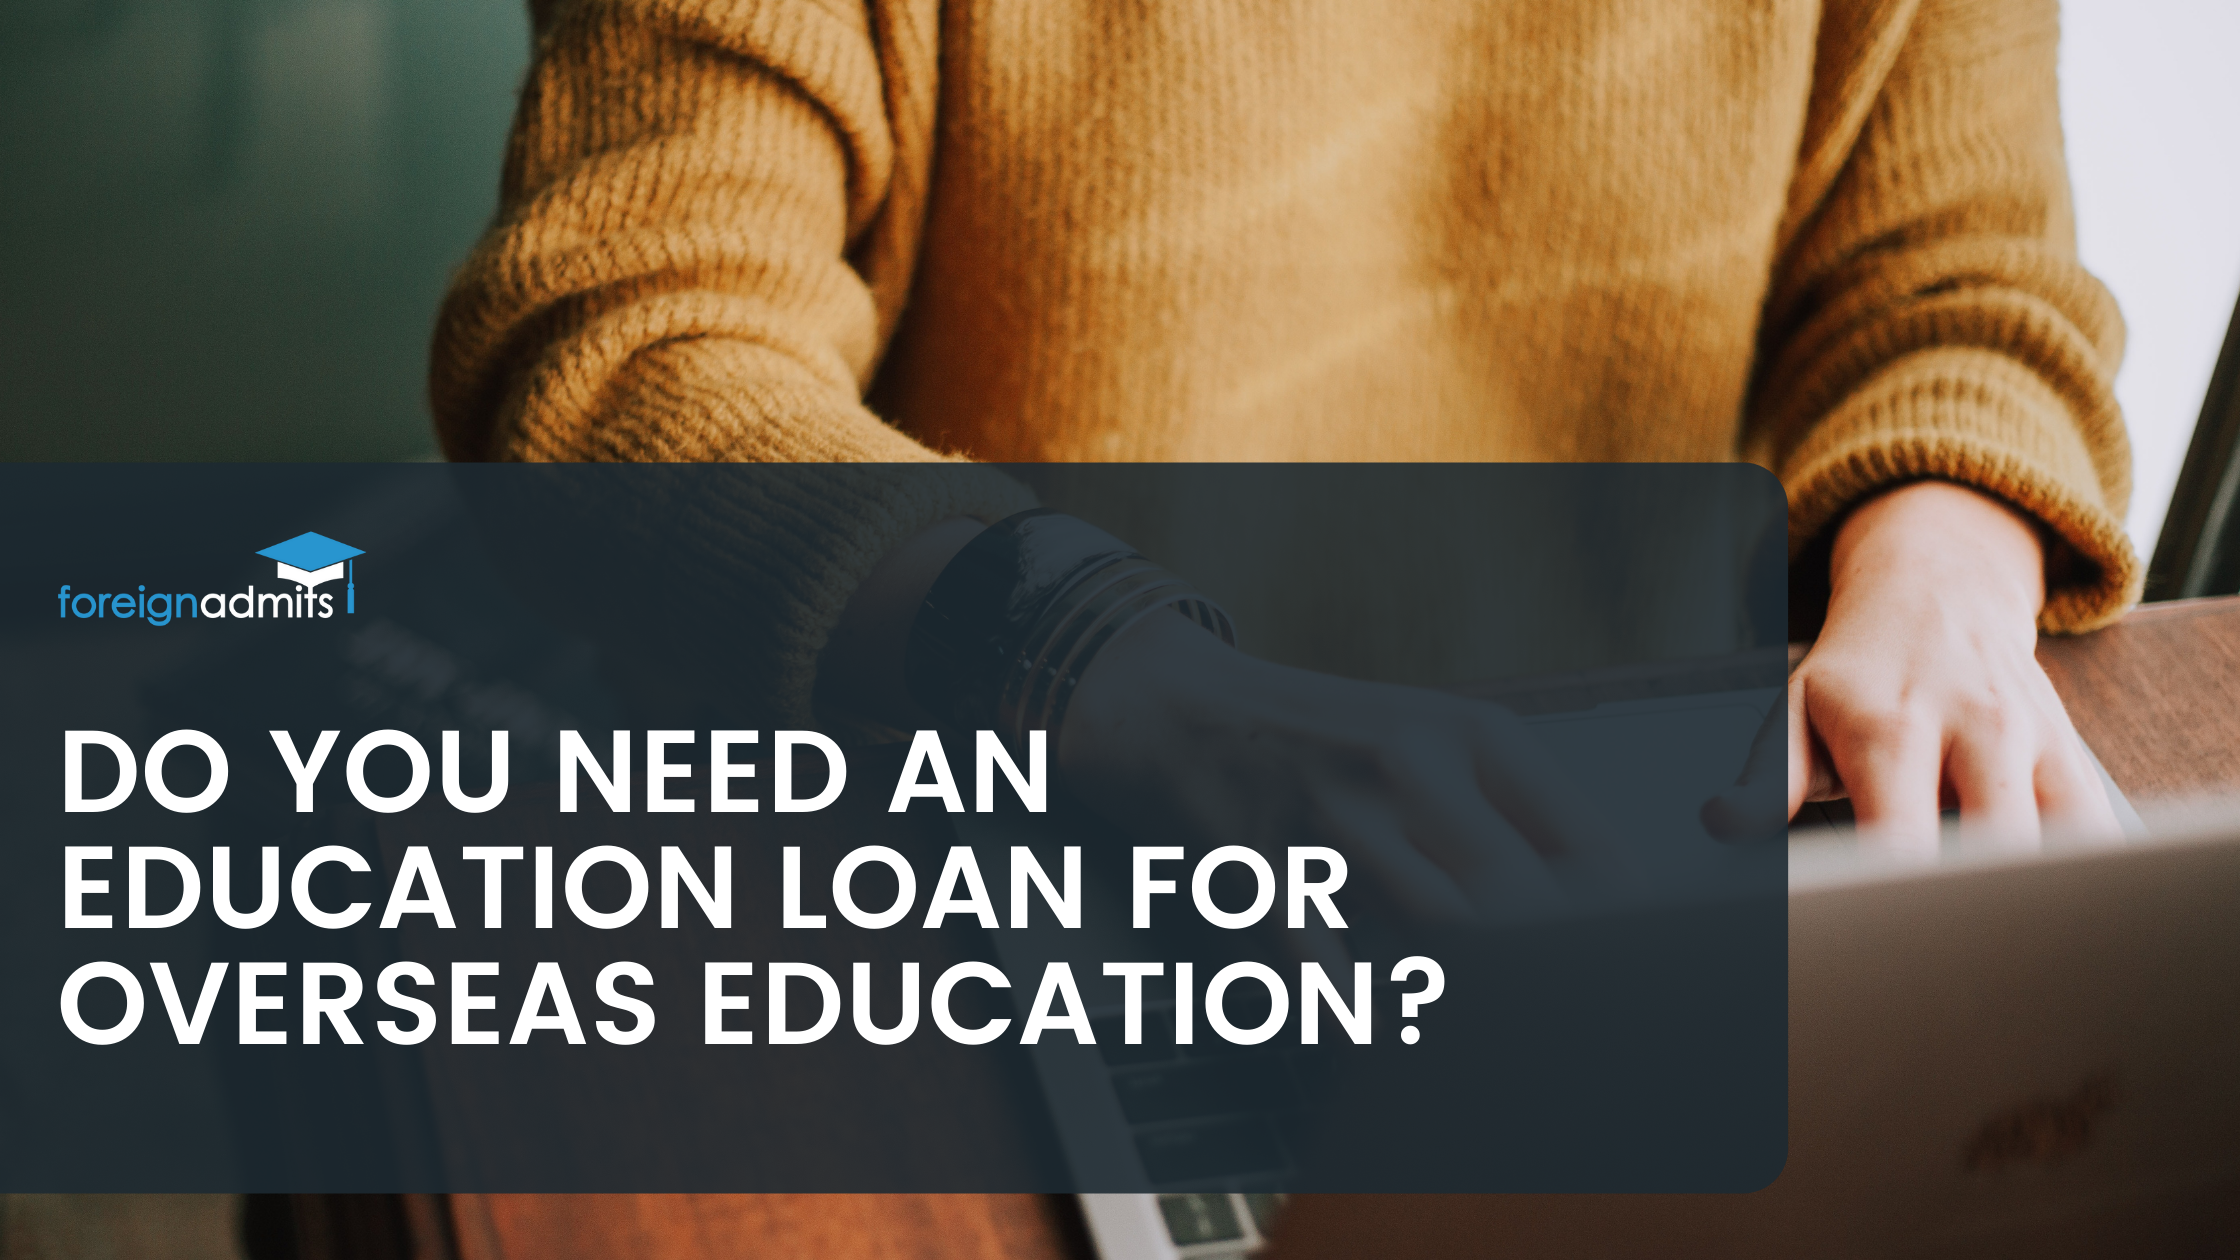 Do you need an education loan for overseas education?